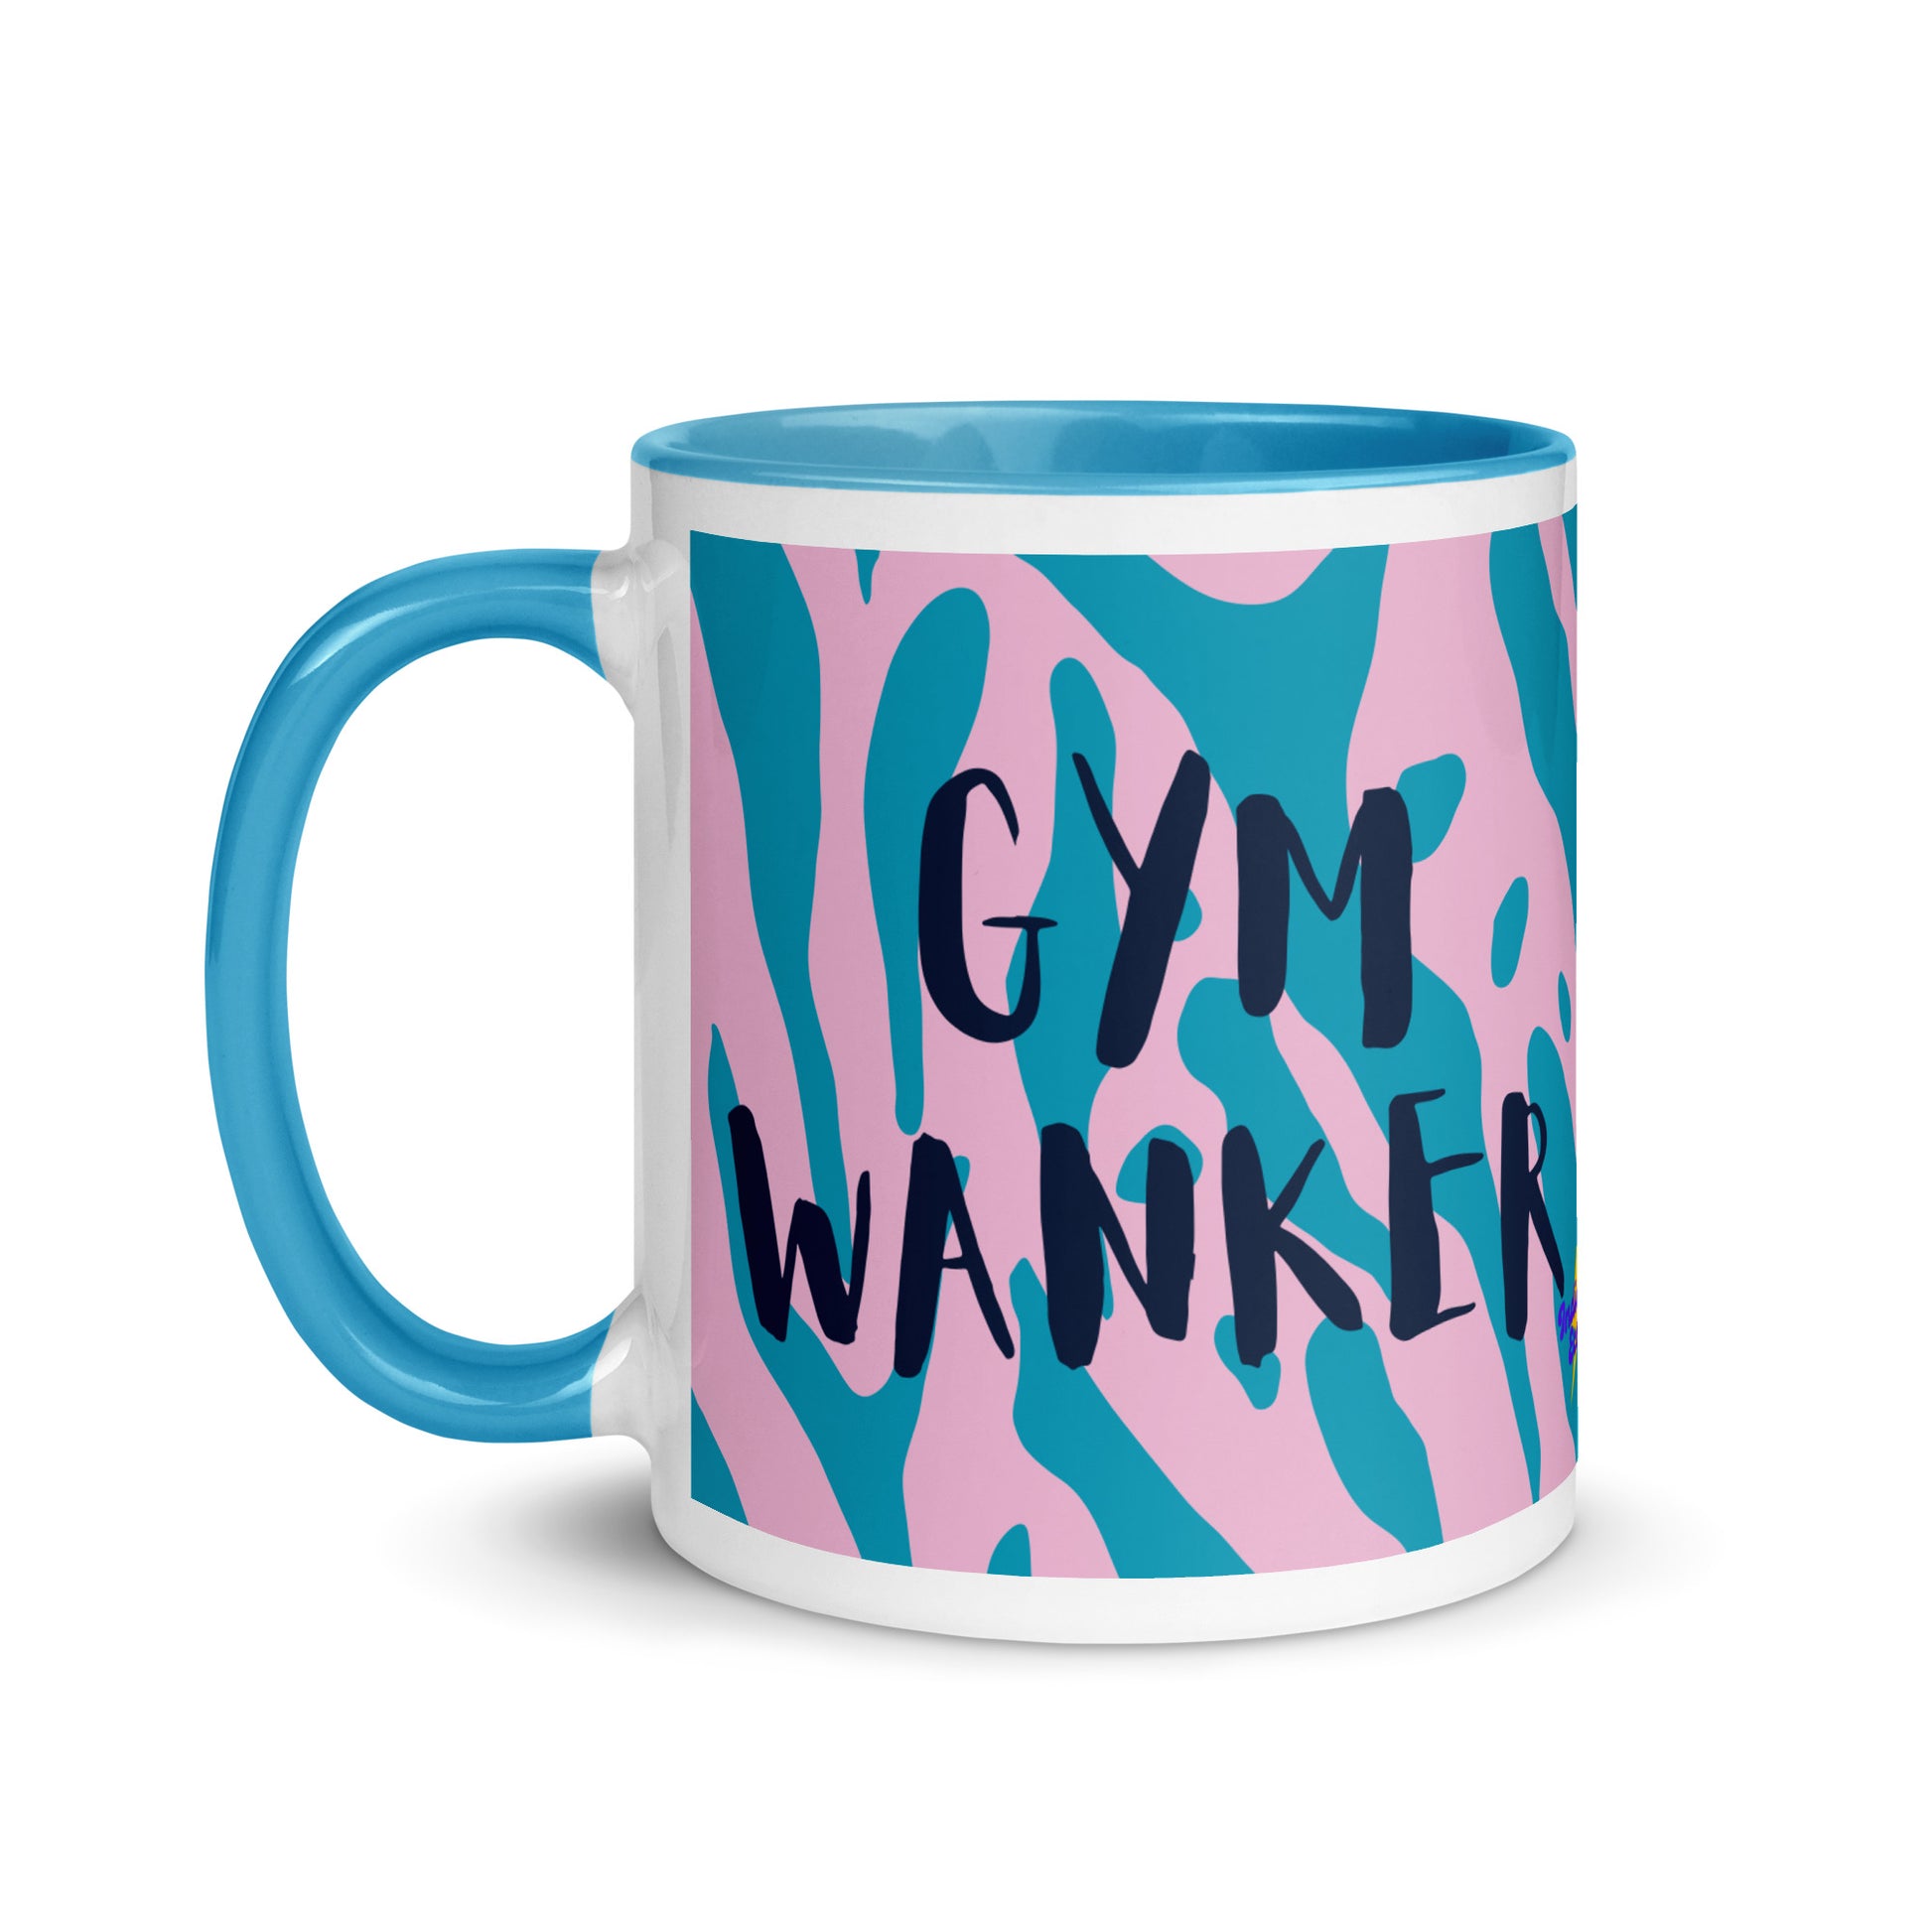 blue handled mug with gym wanker written across a blue and pink animal print background. a gift for people who love the gym